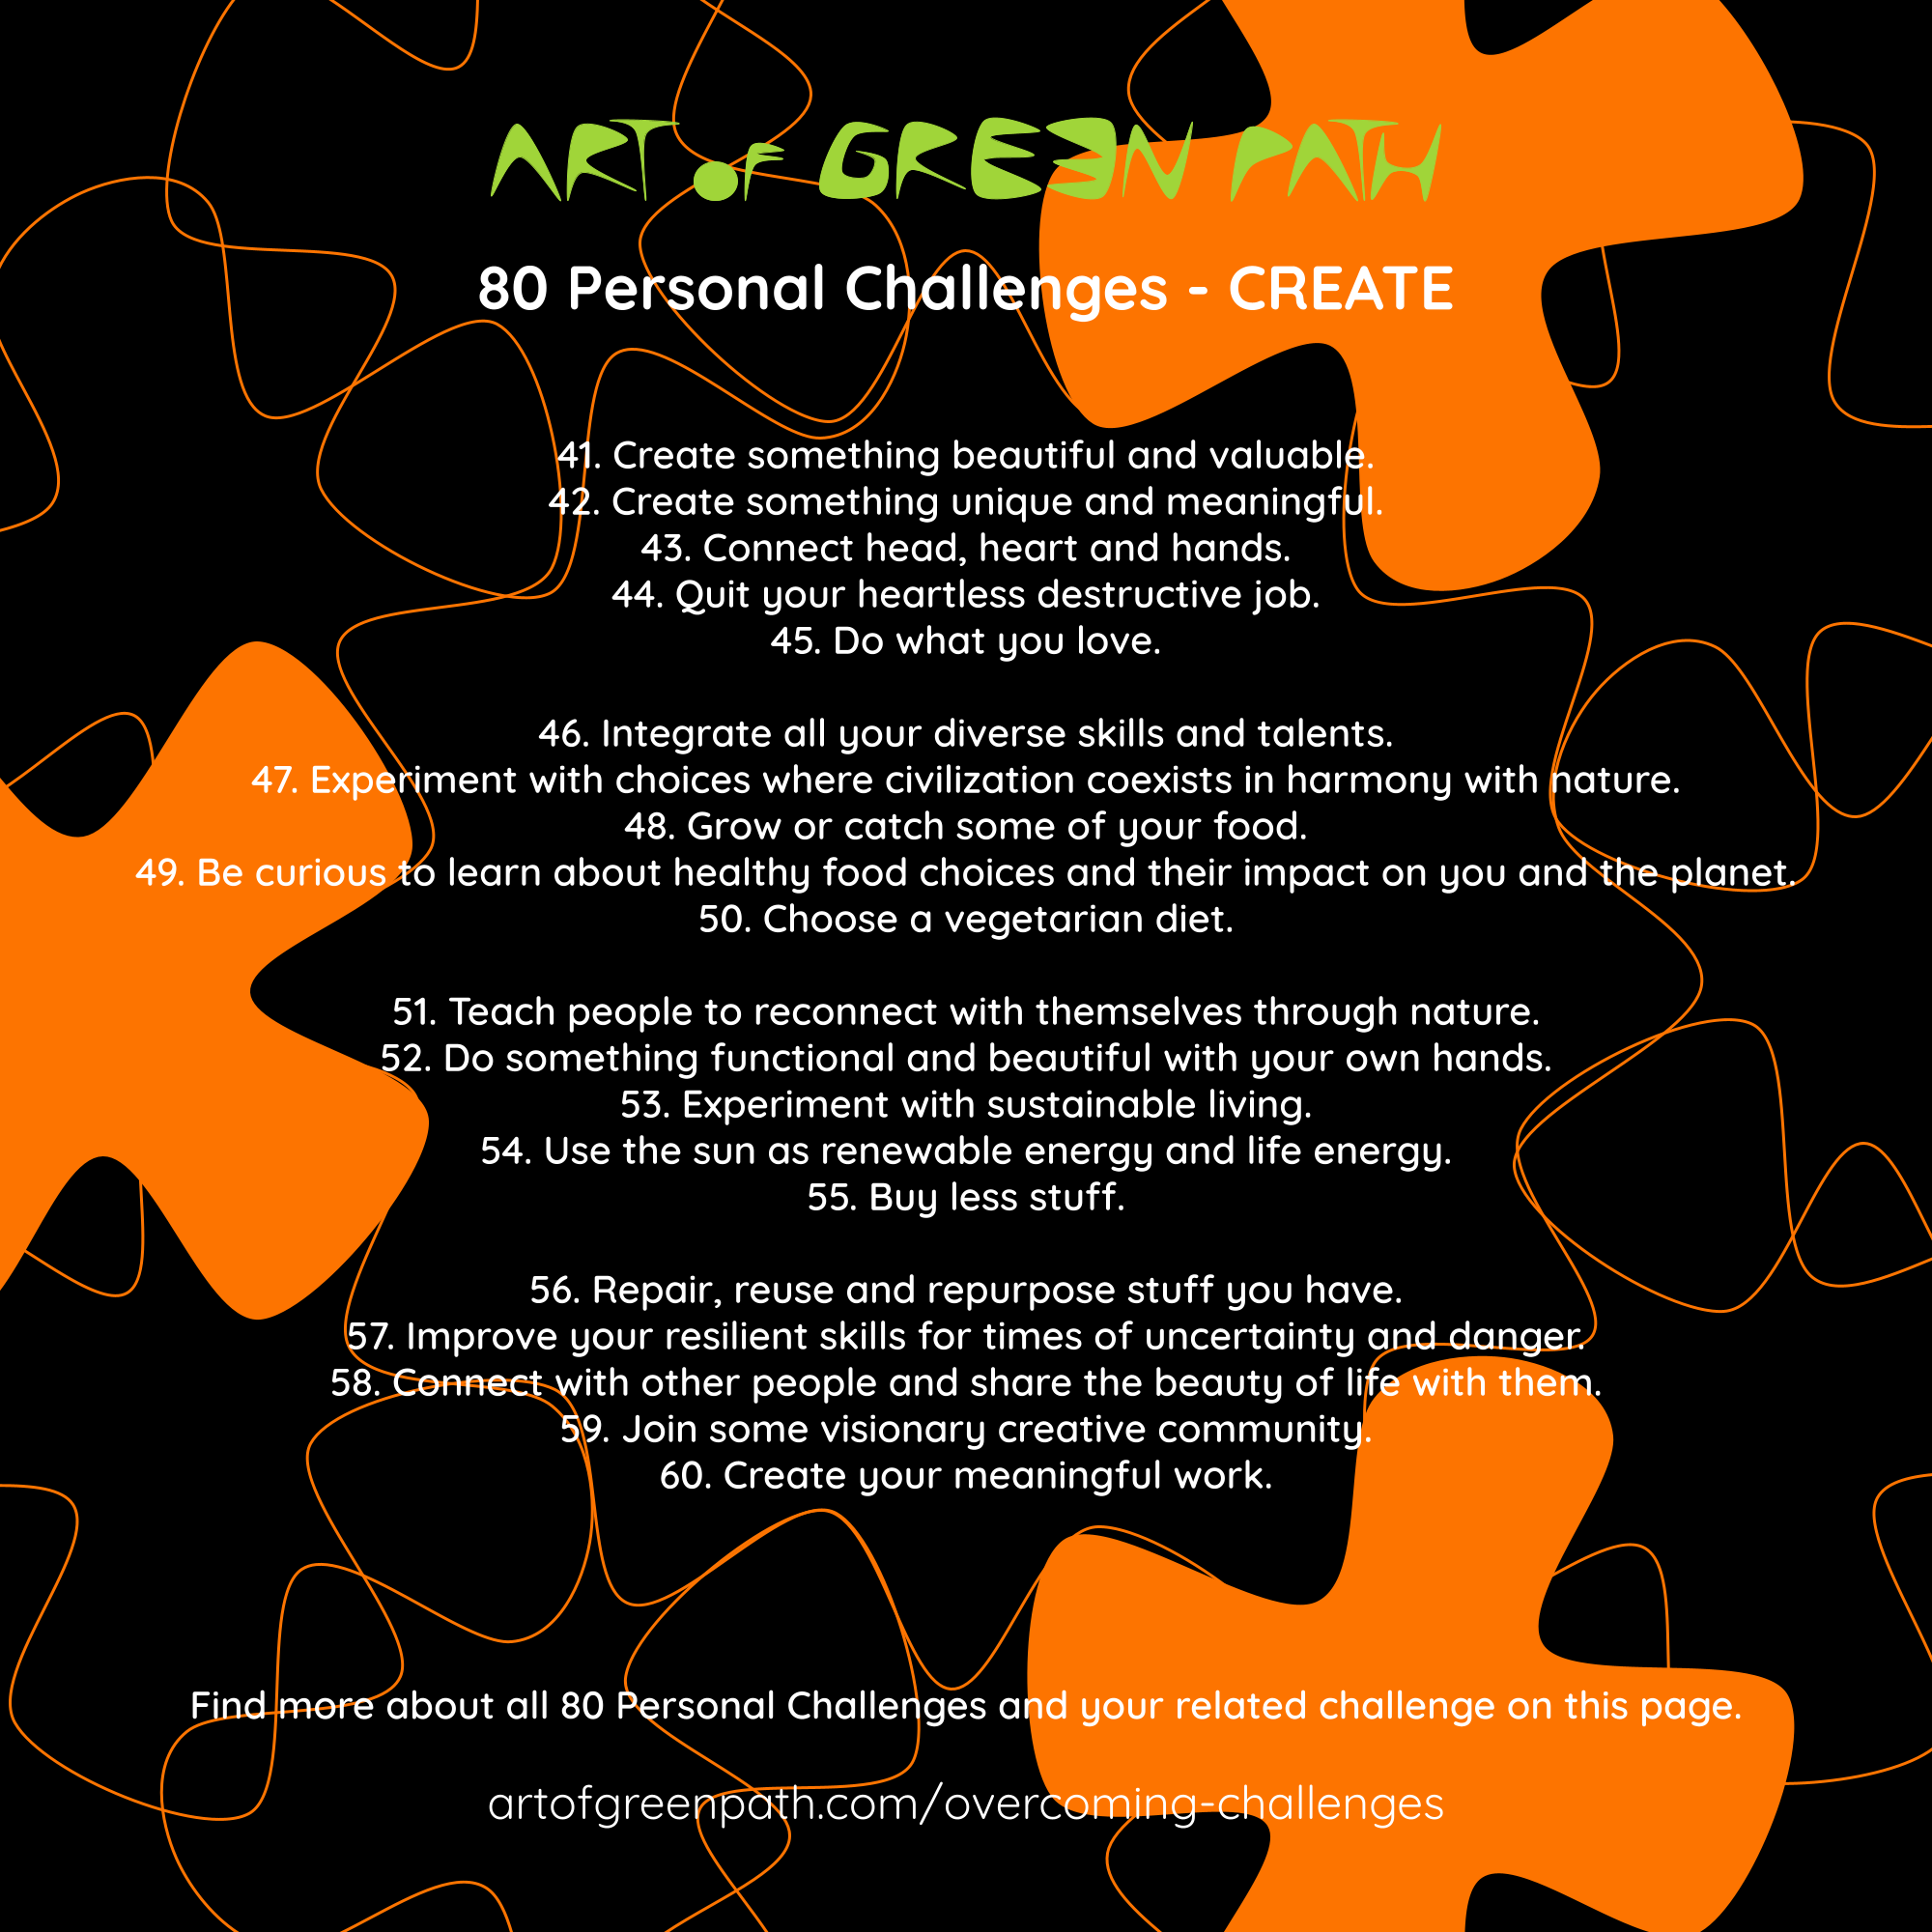 80 Personal Challenges - CREATE by Art Of Green Path